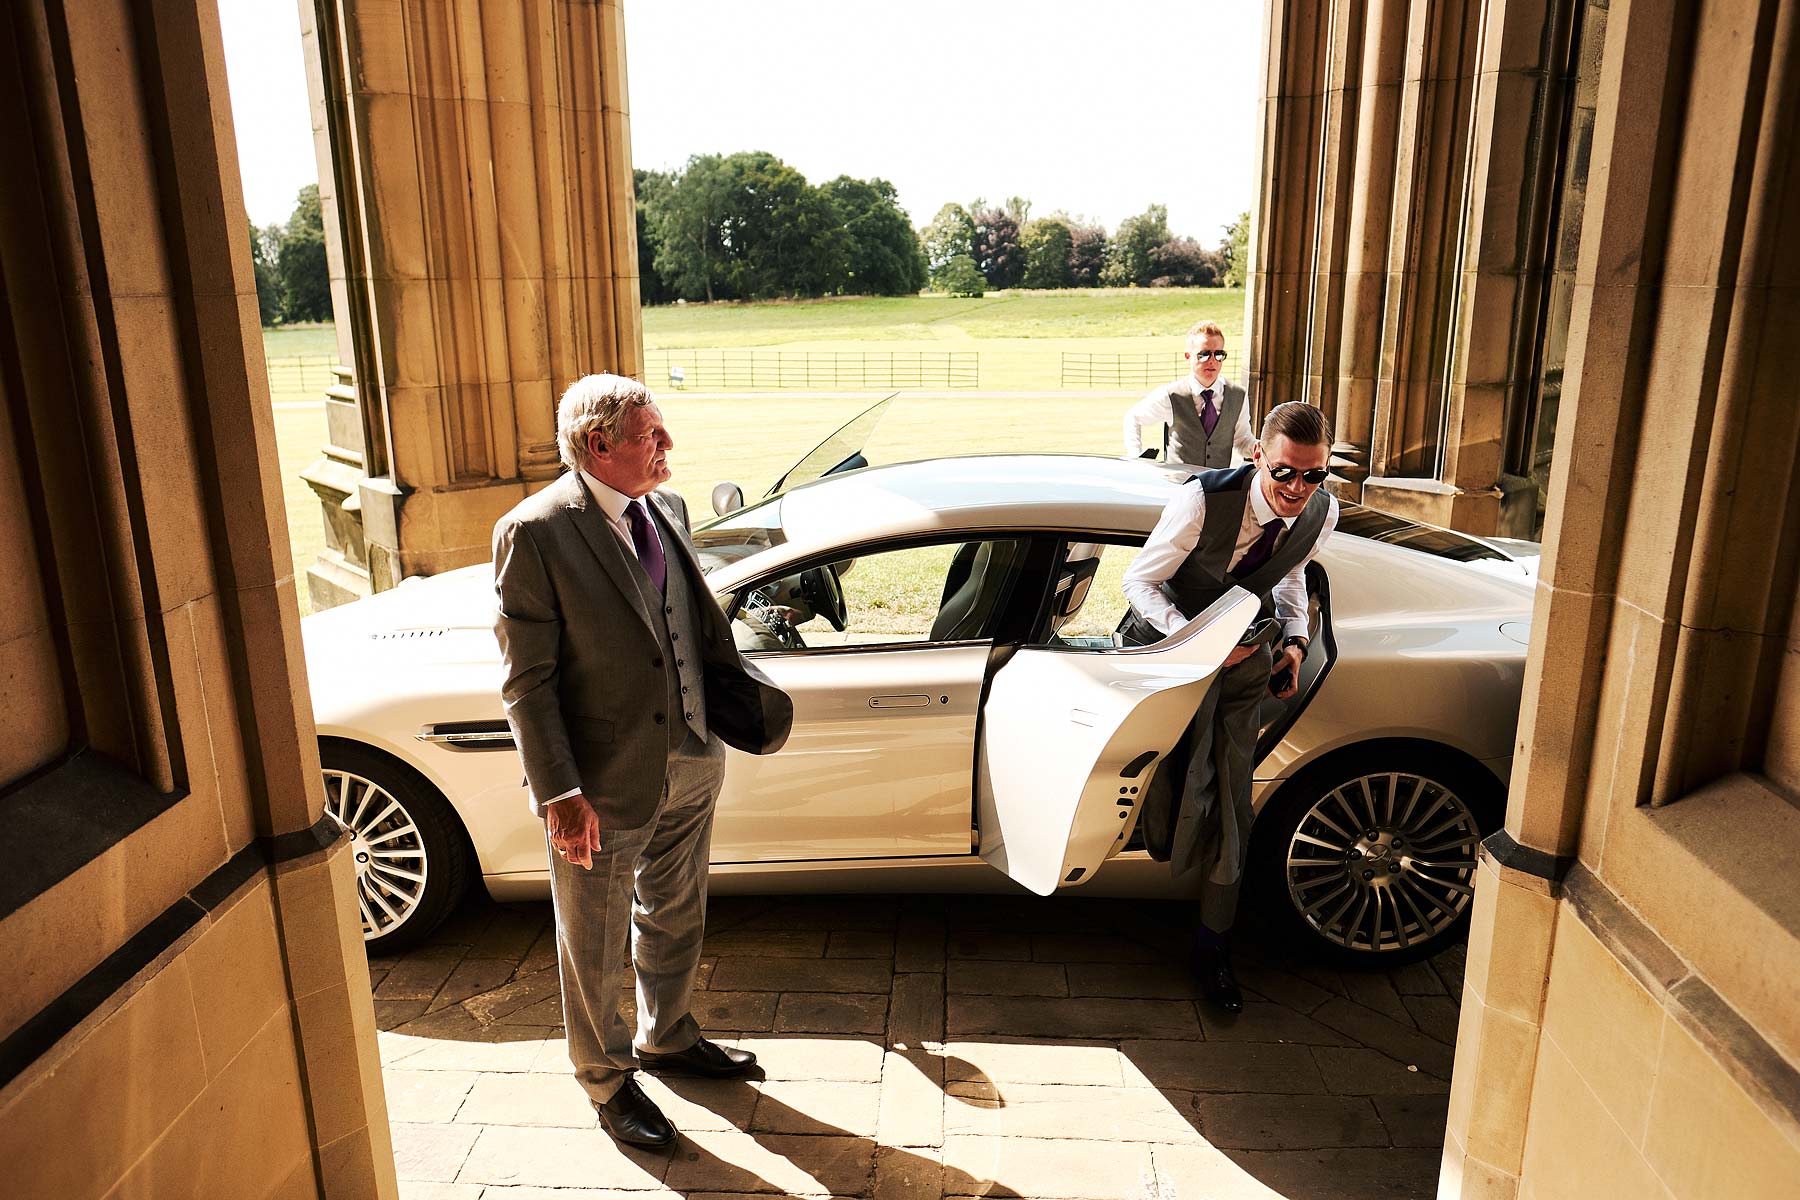 Arriving in style for the wedding at Allerton Castle in Yorkshire by Documentary Wedding Photographer Stuart James